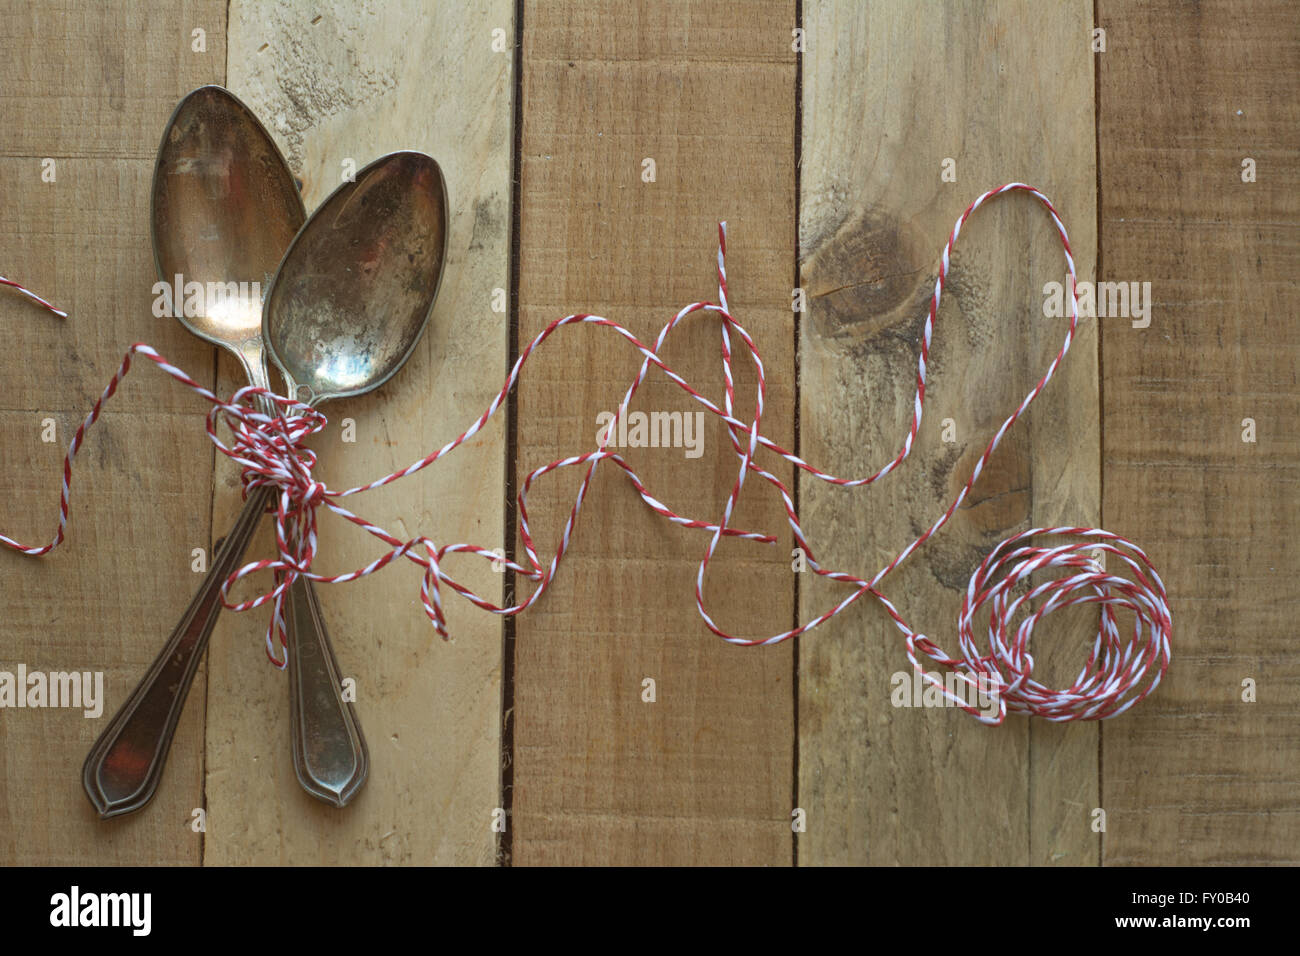 Vintage metal spoons on wooden table close-up Stock Photo